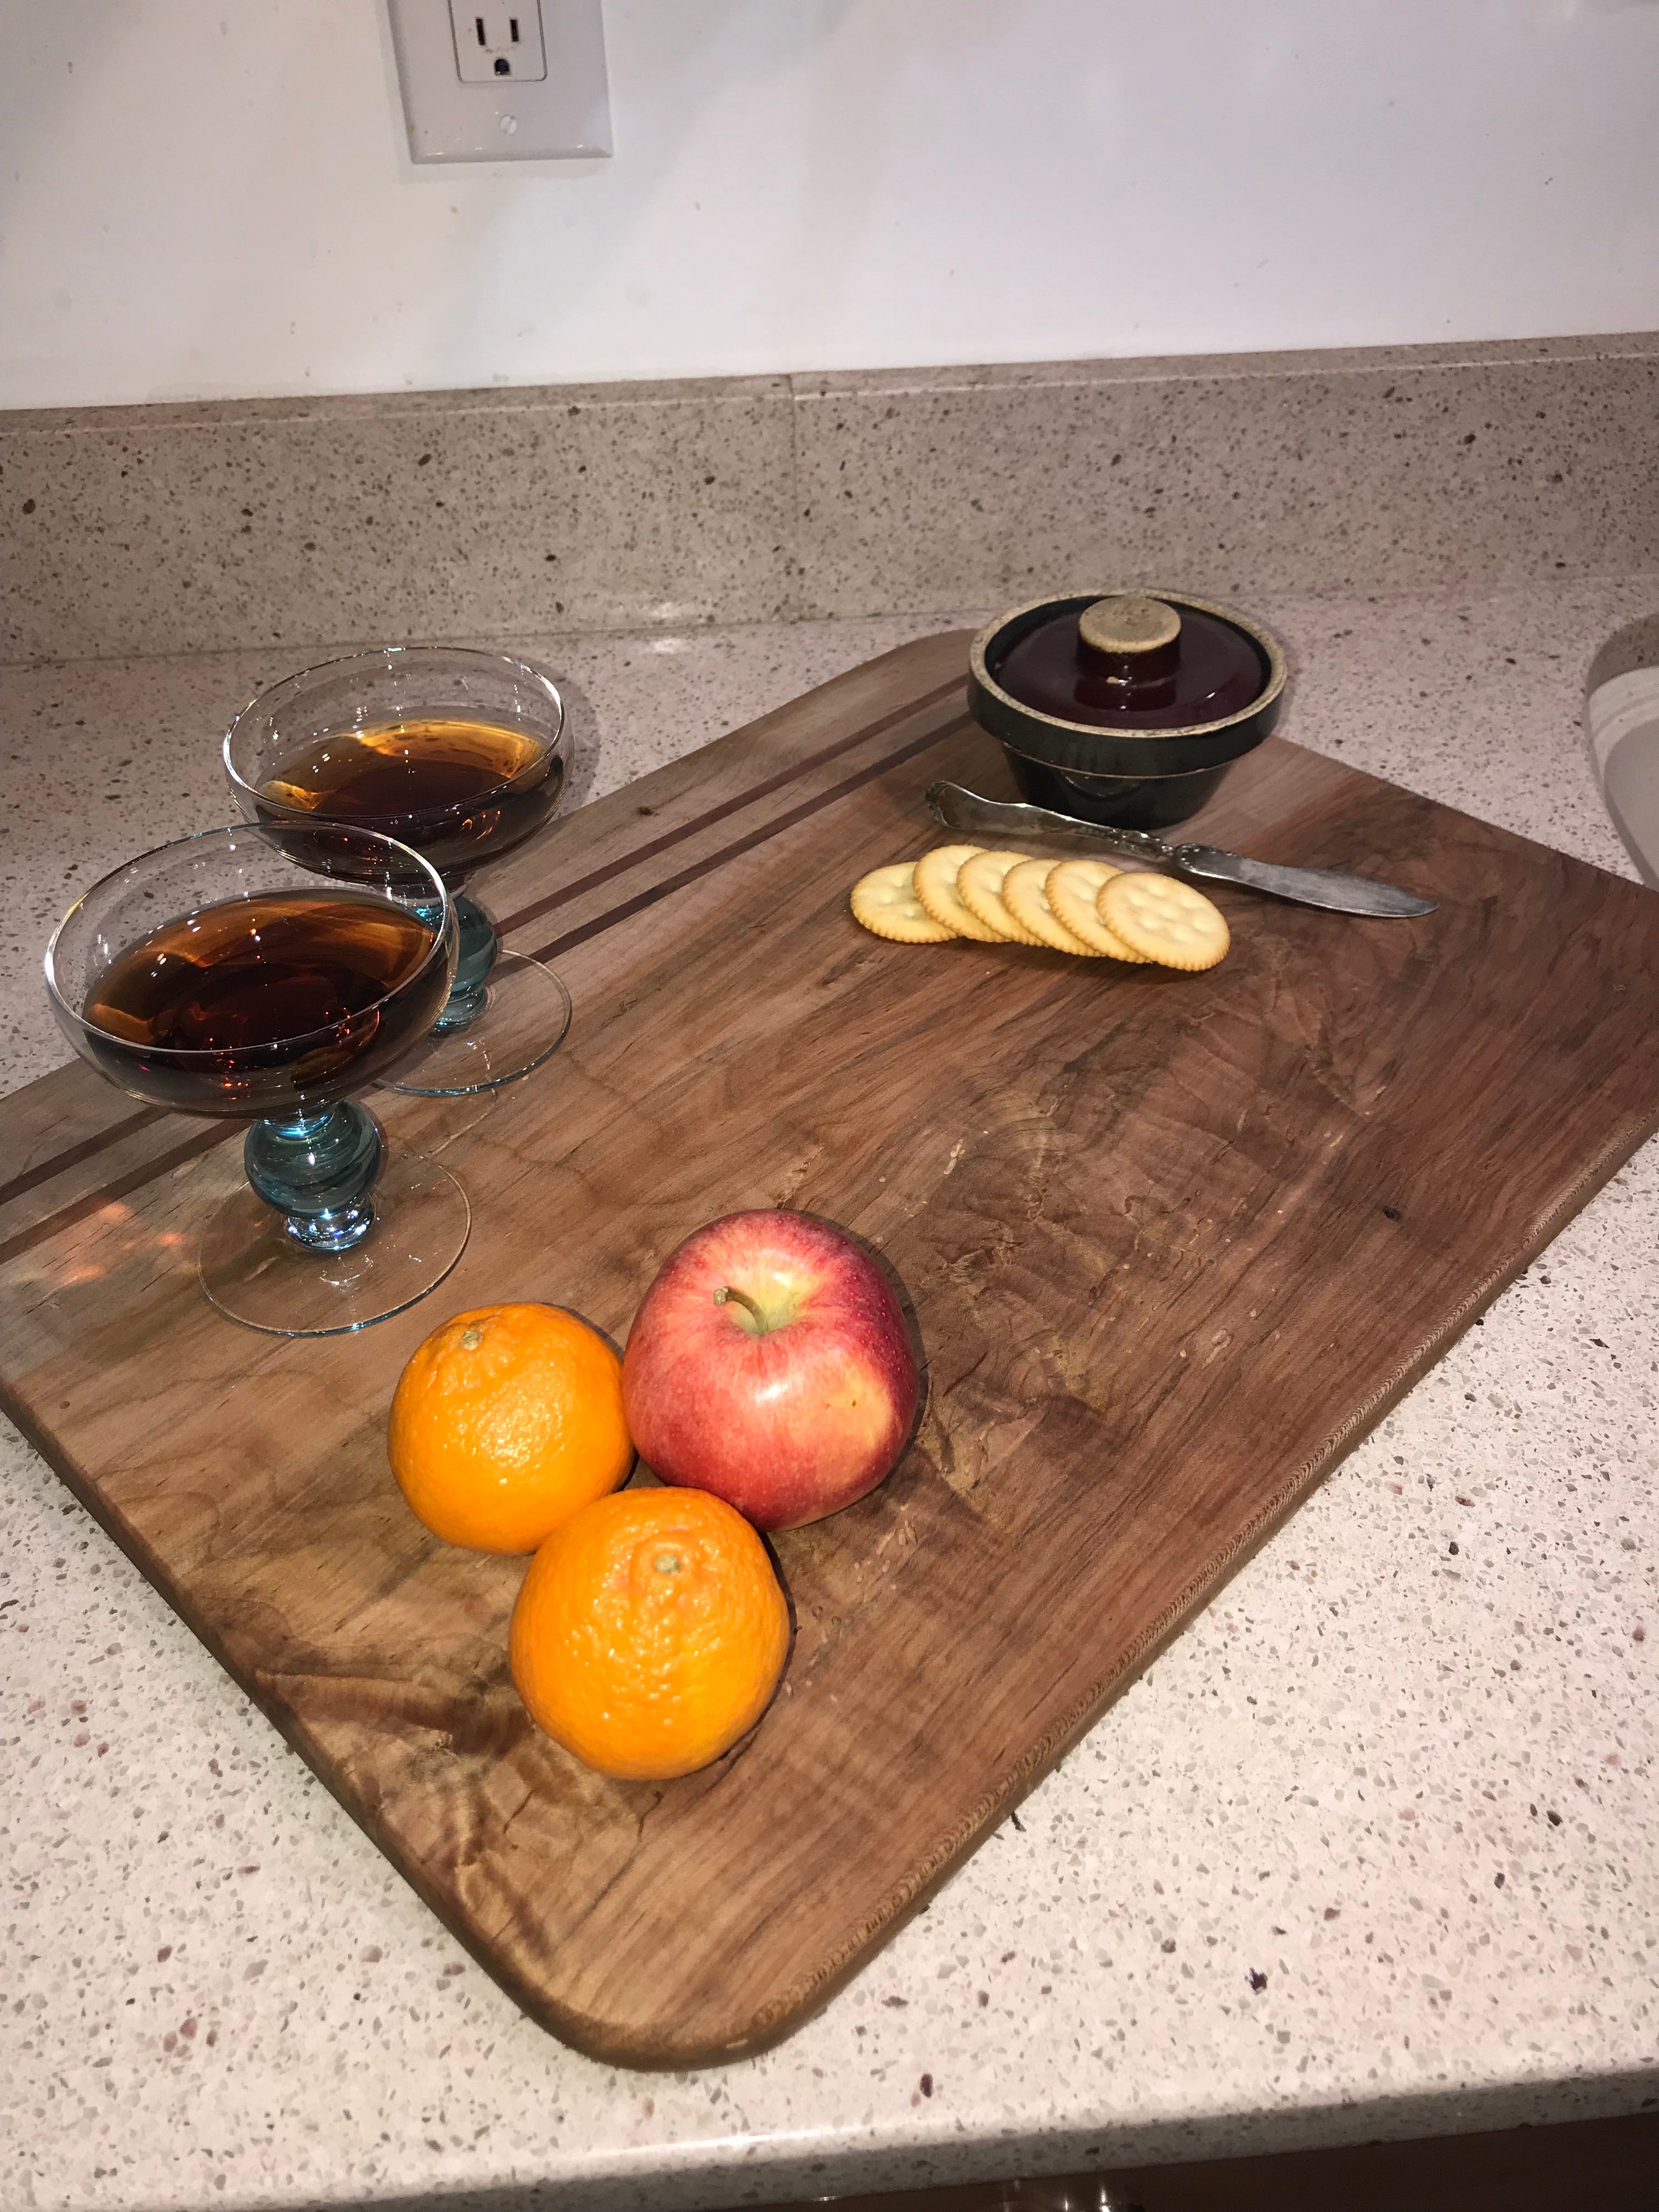 Charcuterie Serving Cheese Bread Board Live Edge Maple Walnut Inlay